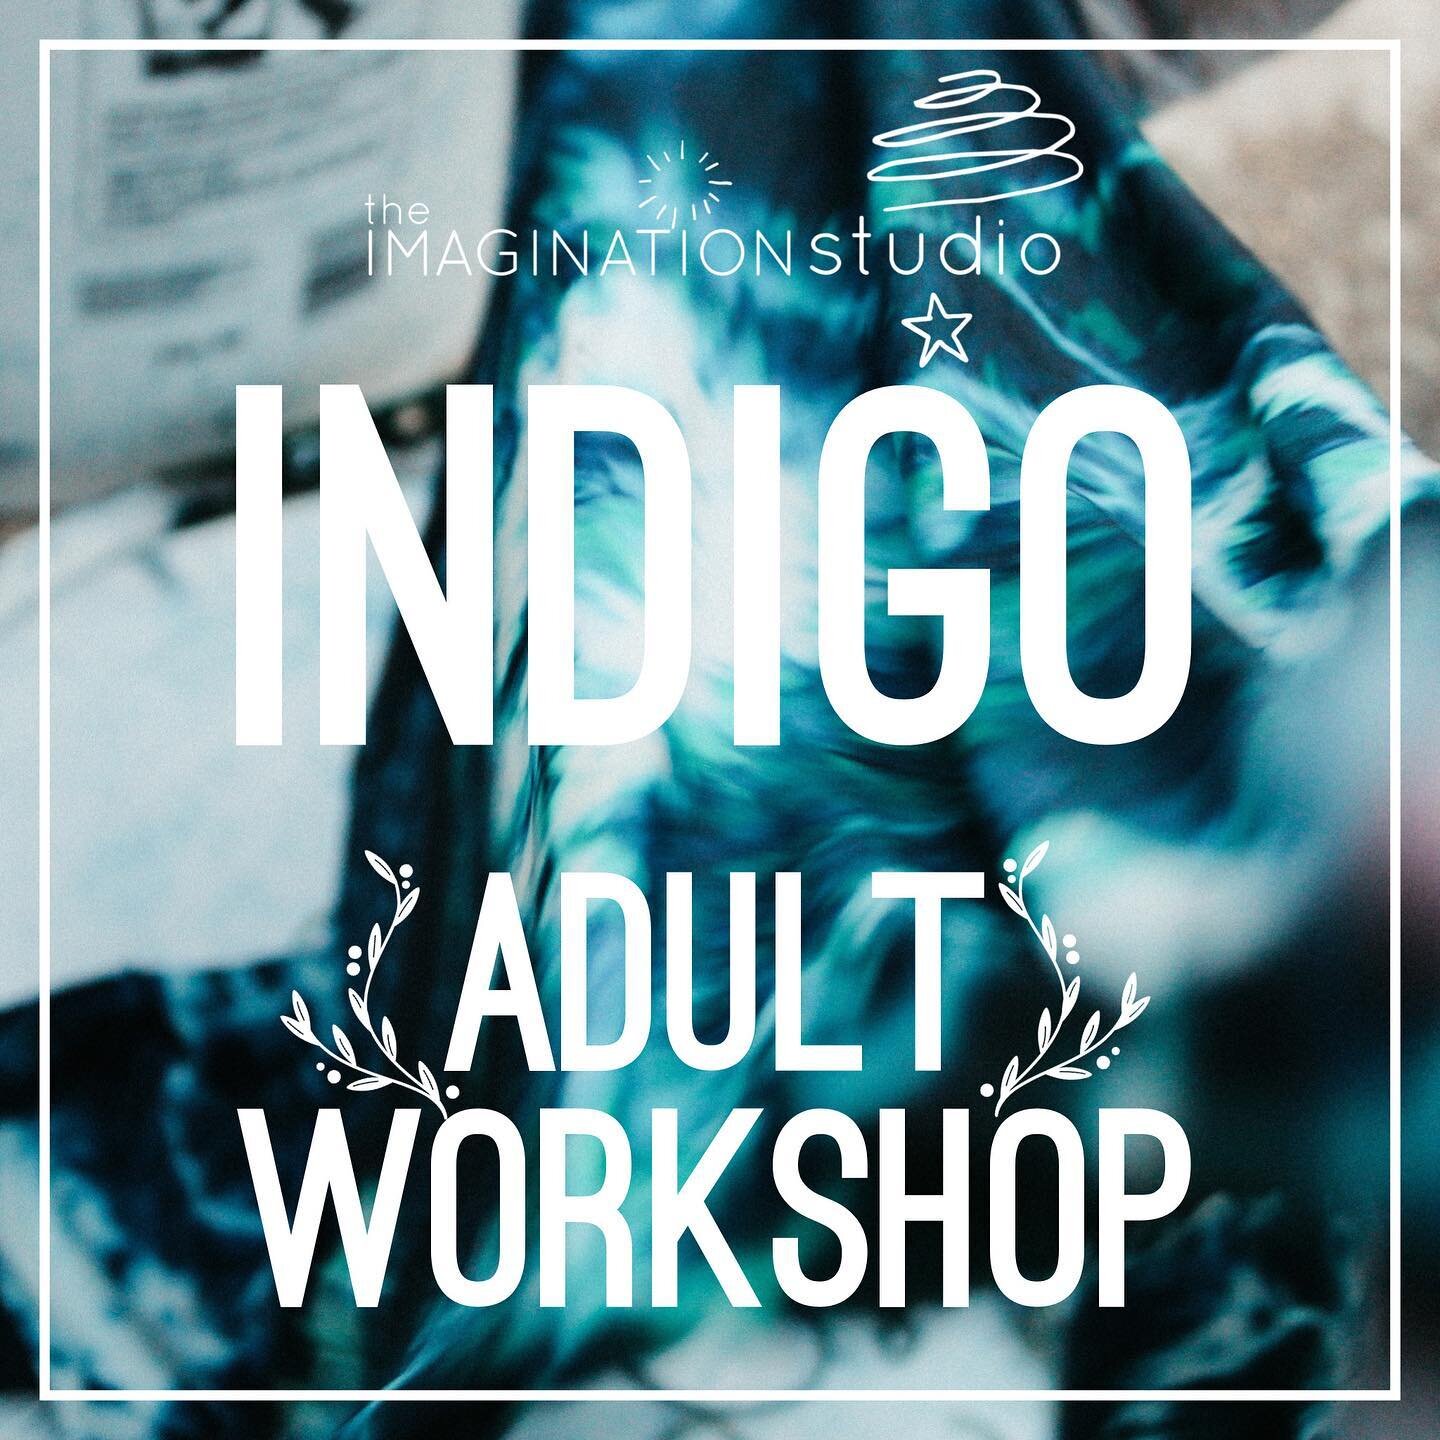 Registration is now open for this workshop! 
Workshop date: Wednesday May 31 with a rain date of Wednesday June 7th. 
Ages 18+